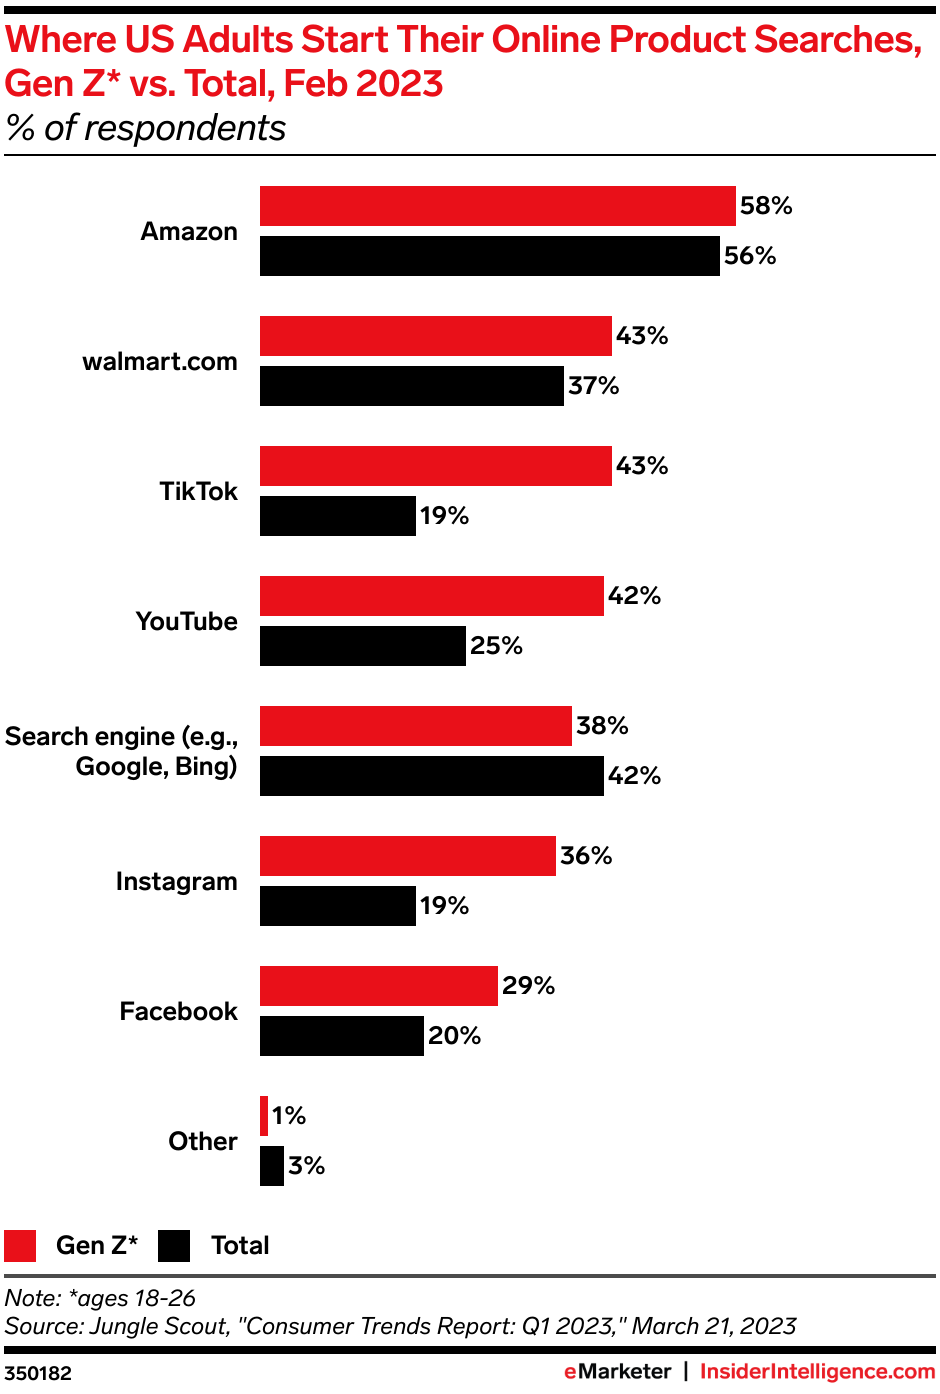 Where US Adults Start Their Online Product Searches, Gen Z* vs. Total, Q1 2023 (% of respondents)